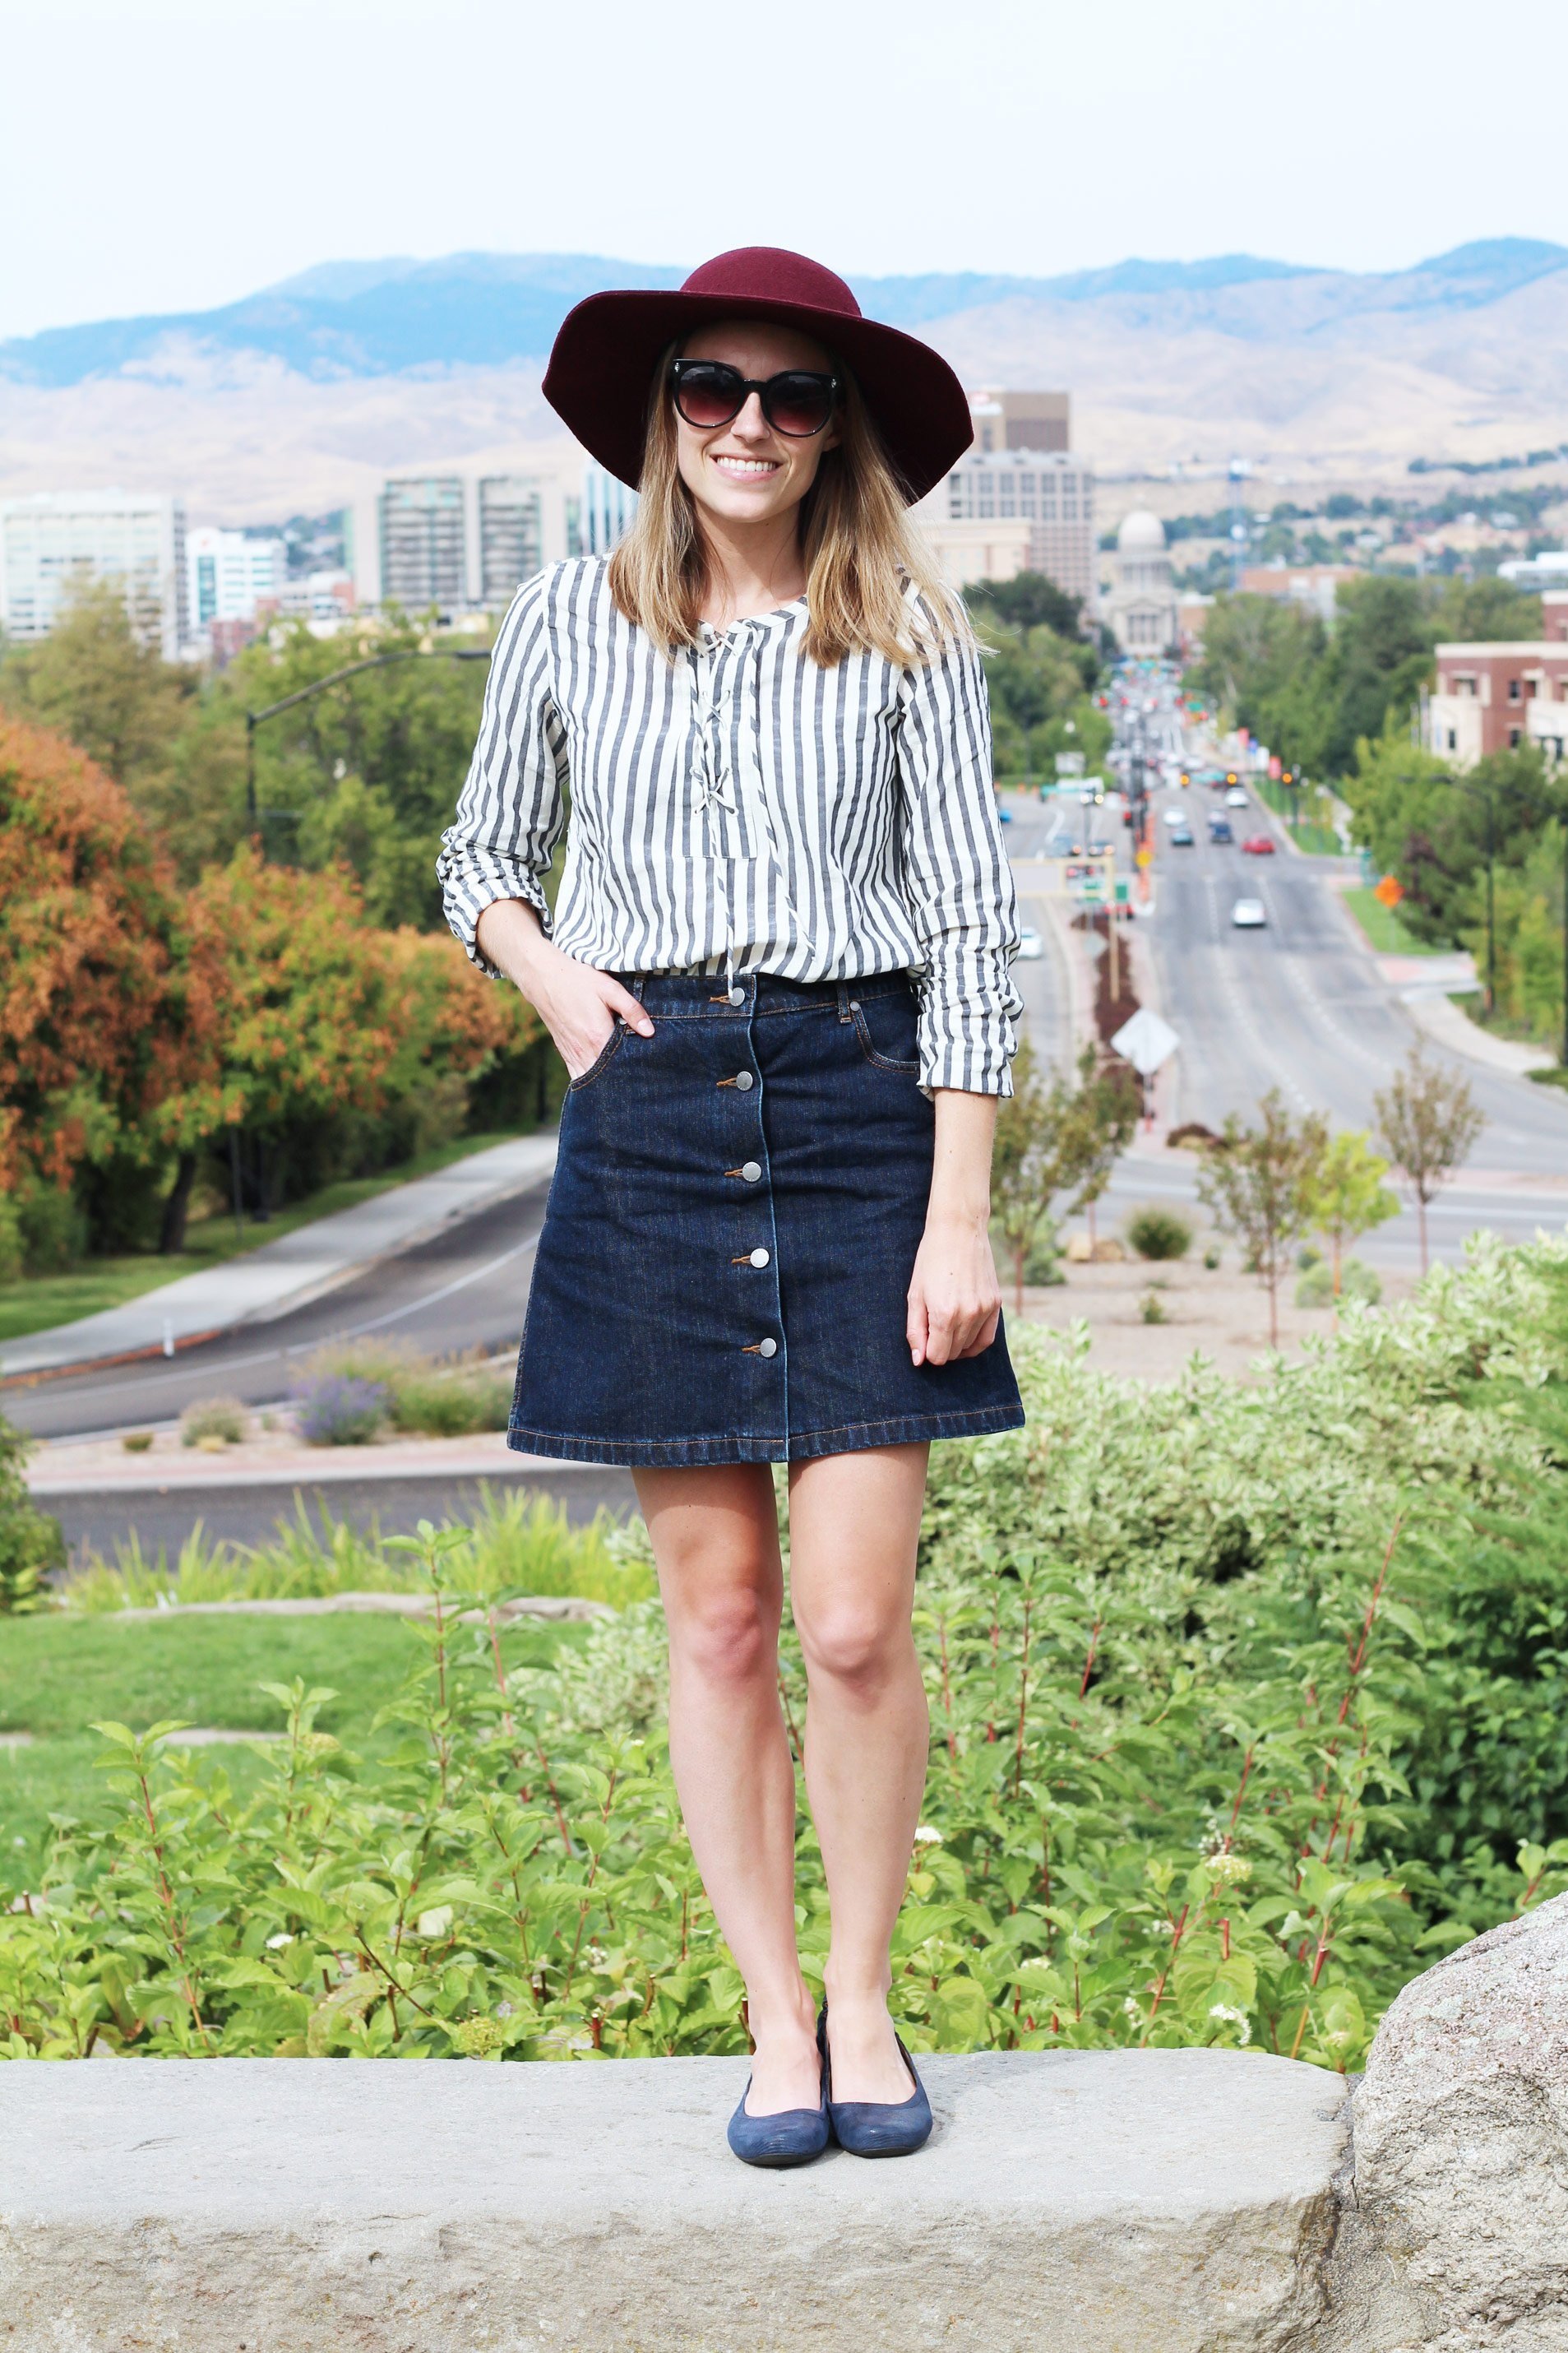 14 Summer to Fall Transition Outfits